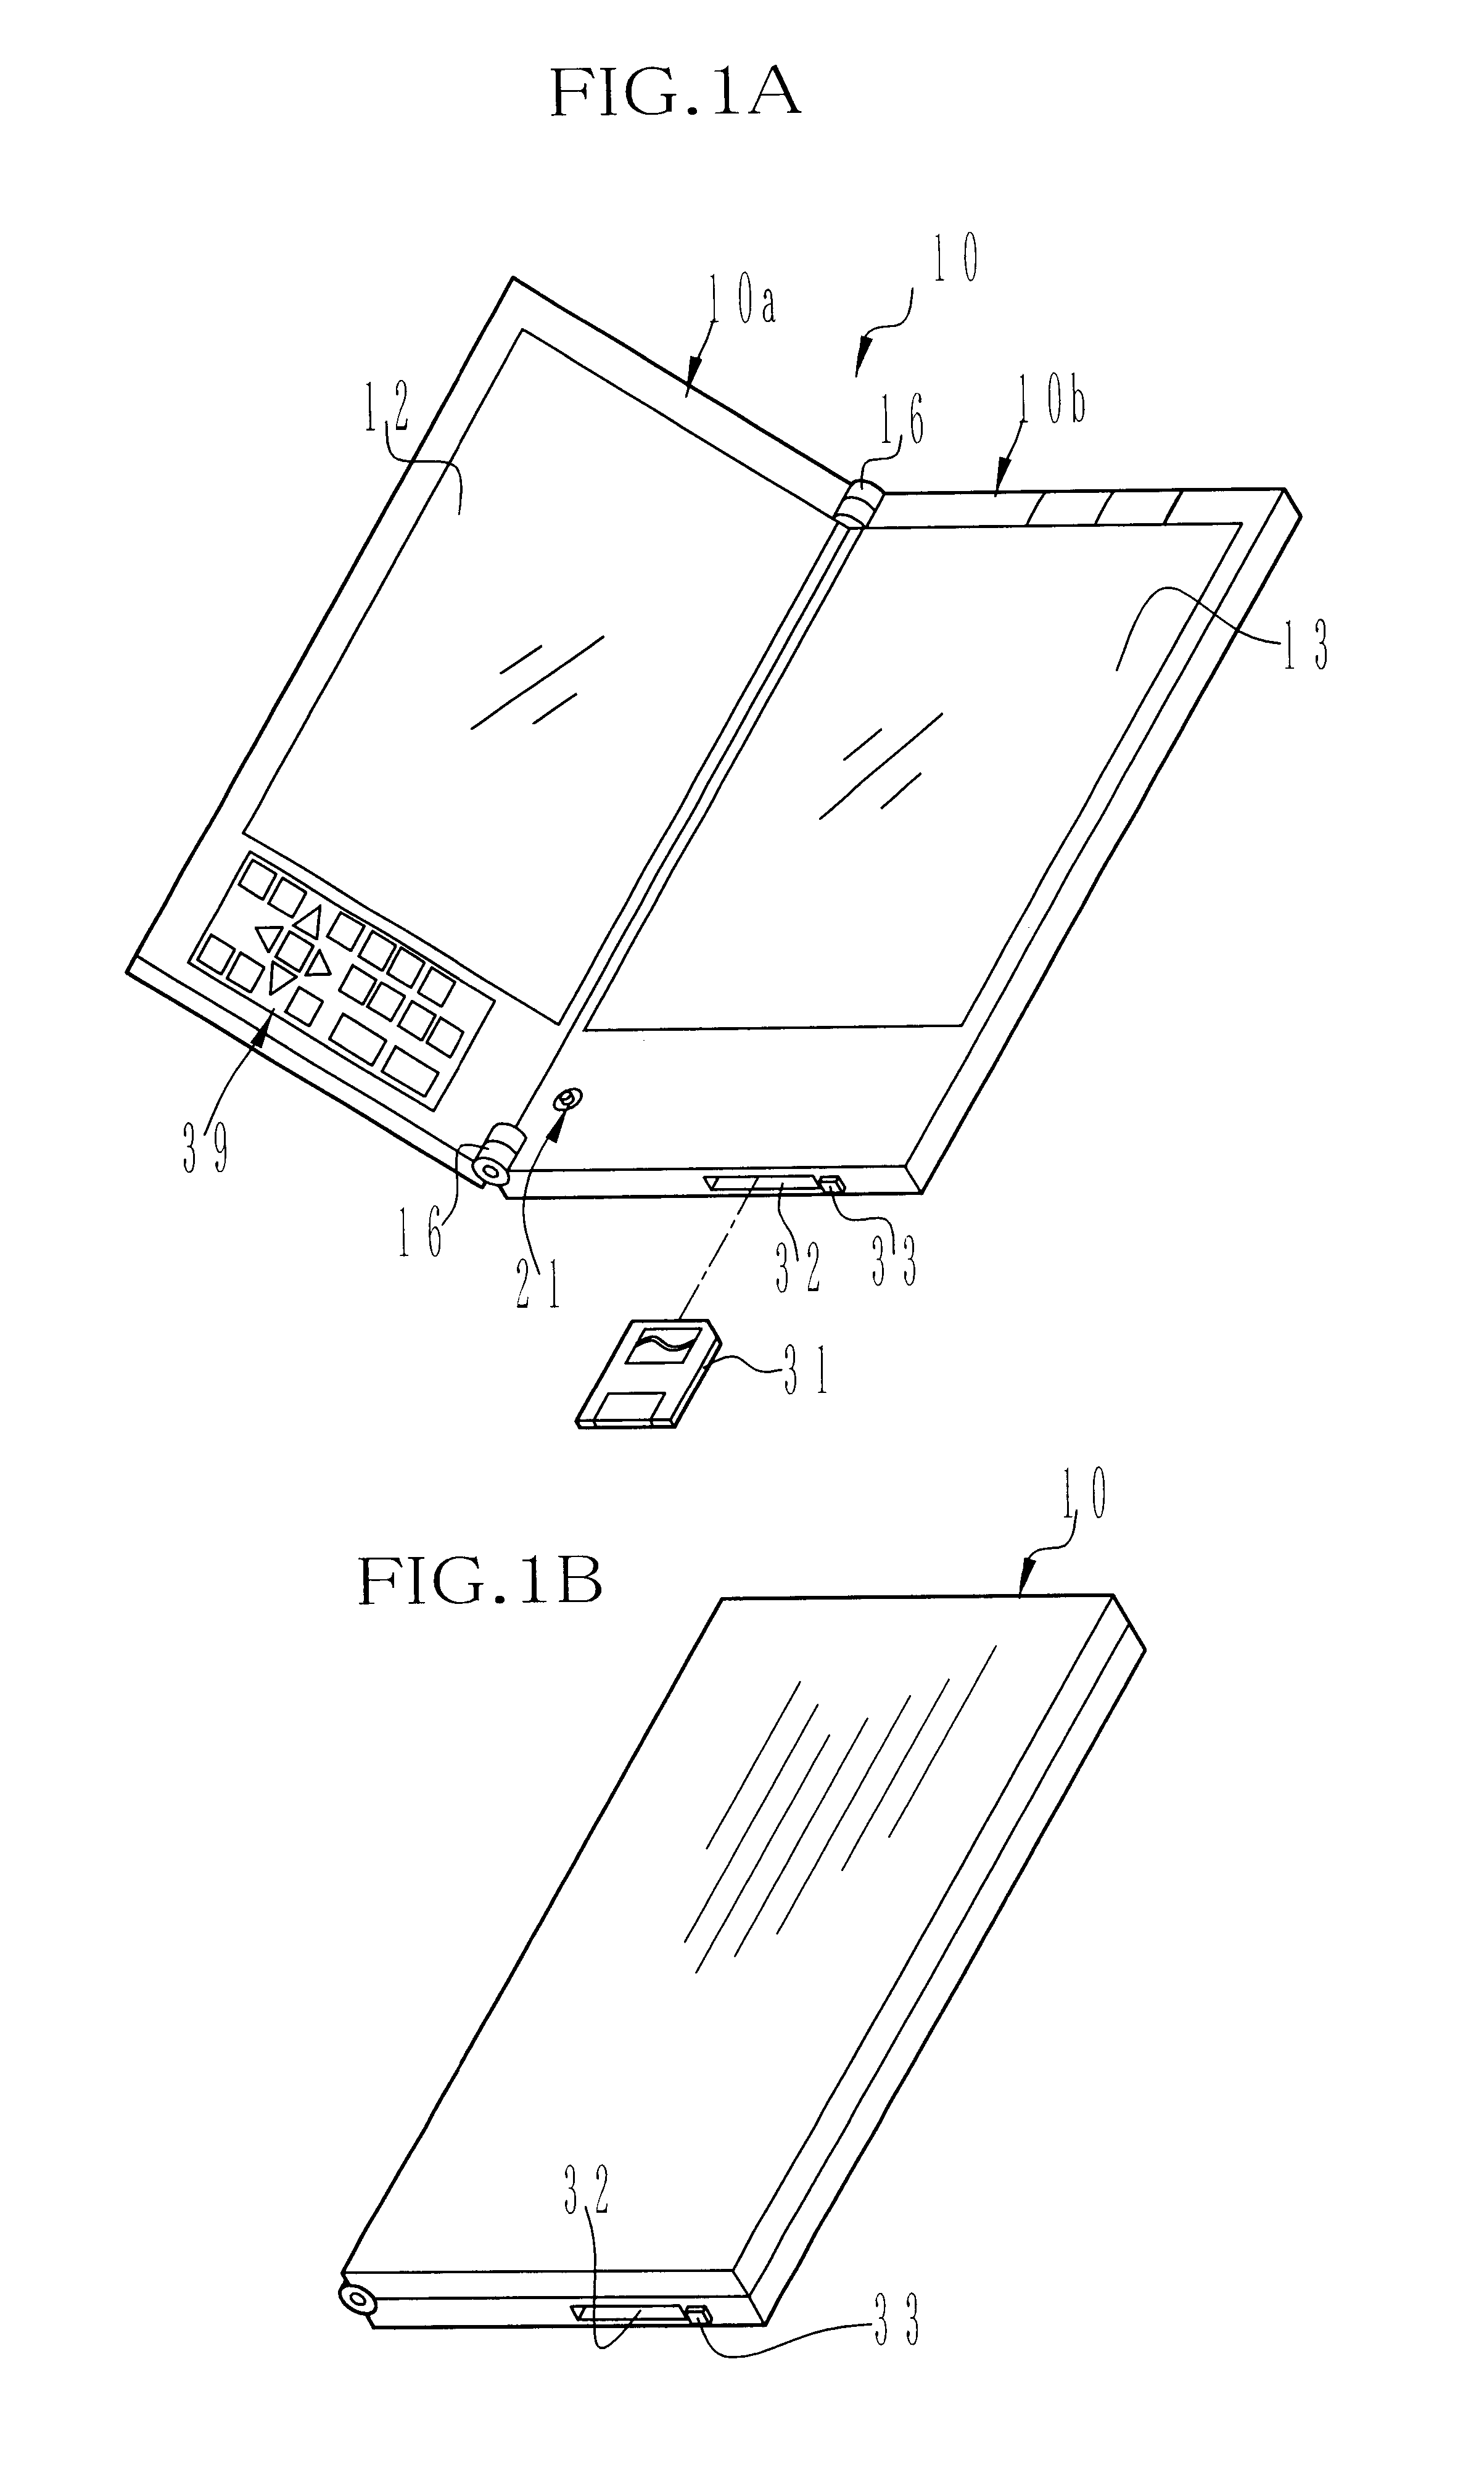 Electronic image display device and printing system therefor